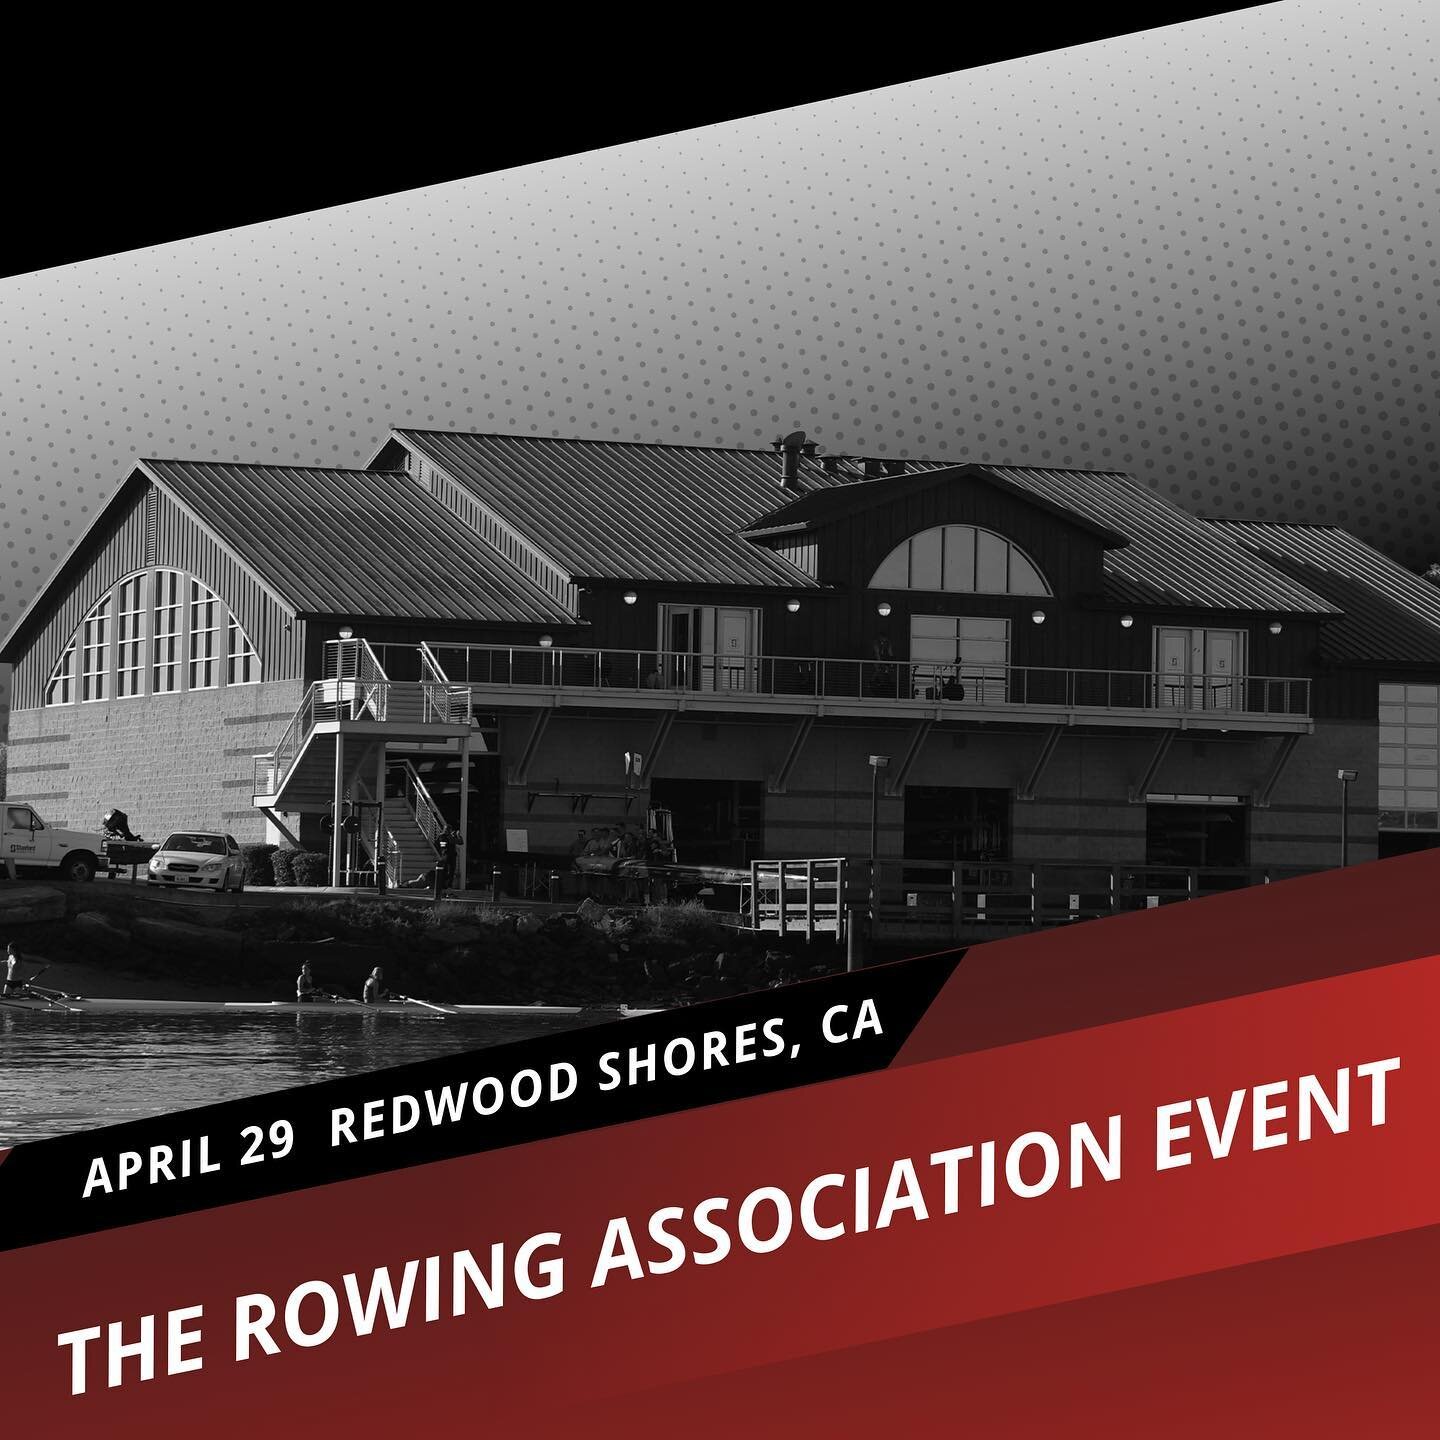 This weekend- @stanfordlwtcrew are off to Sacramento to race in the WIRA Championship, while @stanfordwcrew races concurrent with the @stanfordmrowing Big Row in the PAC-12 Dual at Redwood Shores.

The Rowing Association will have a tent on Saturday,